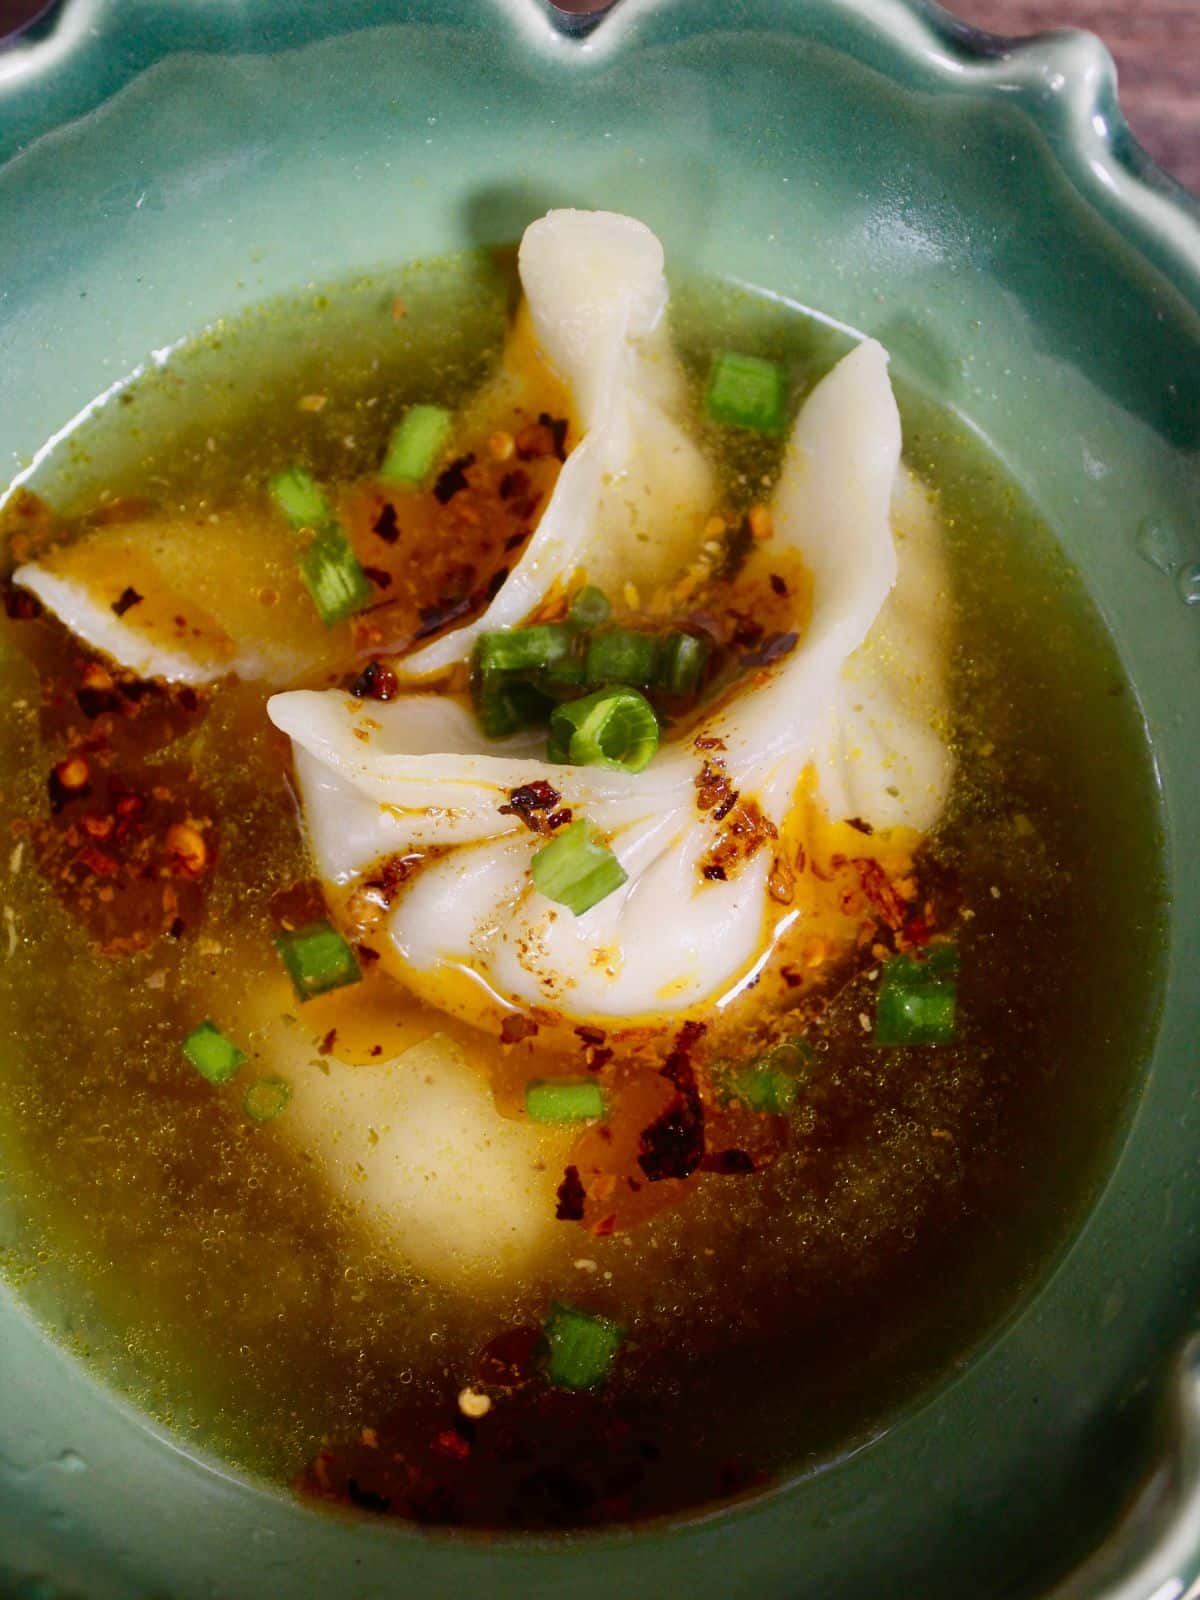 Super Zoom top view image of dumplings with warm broth